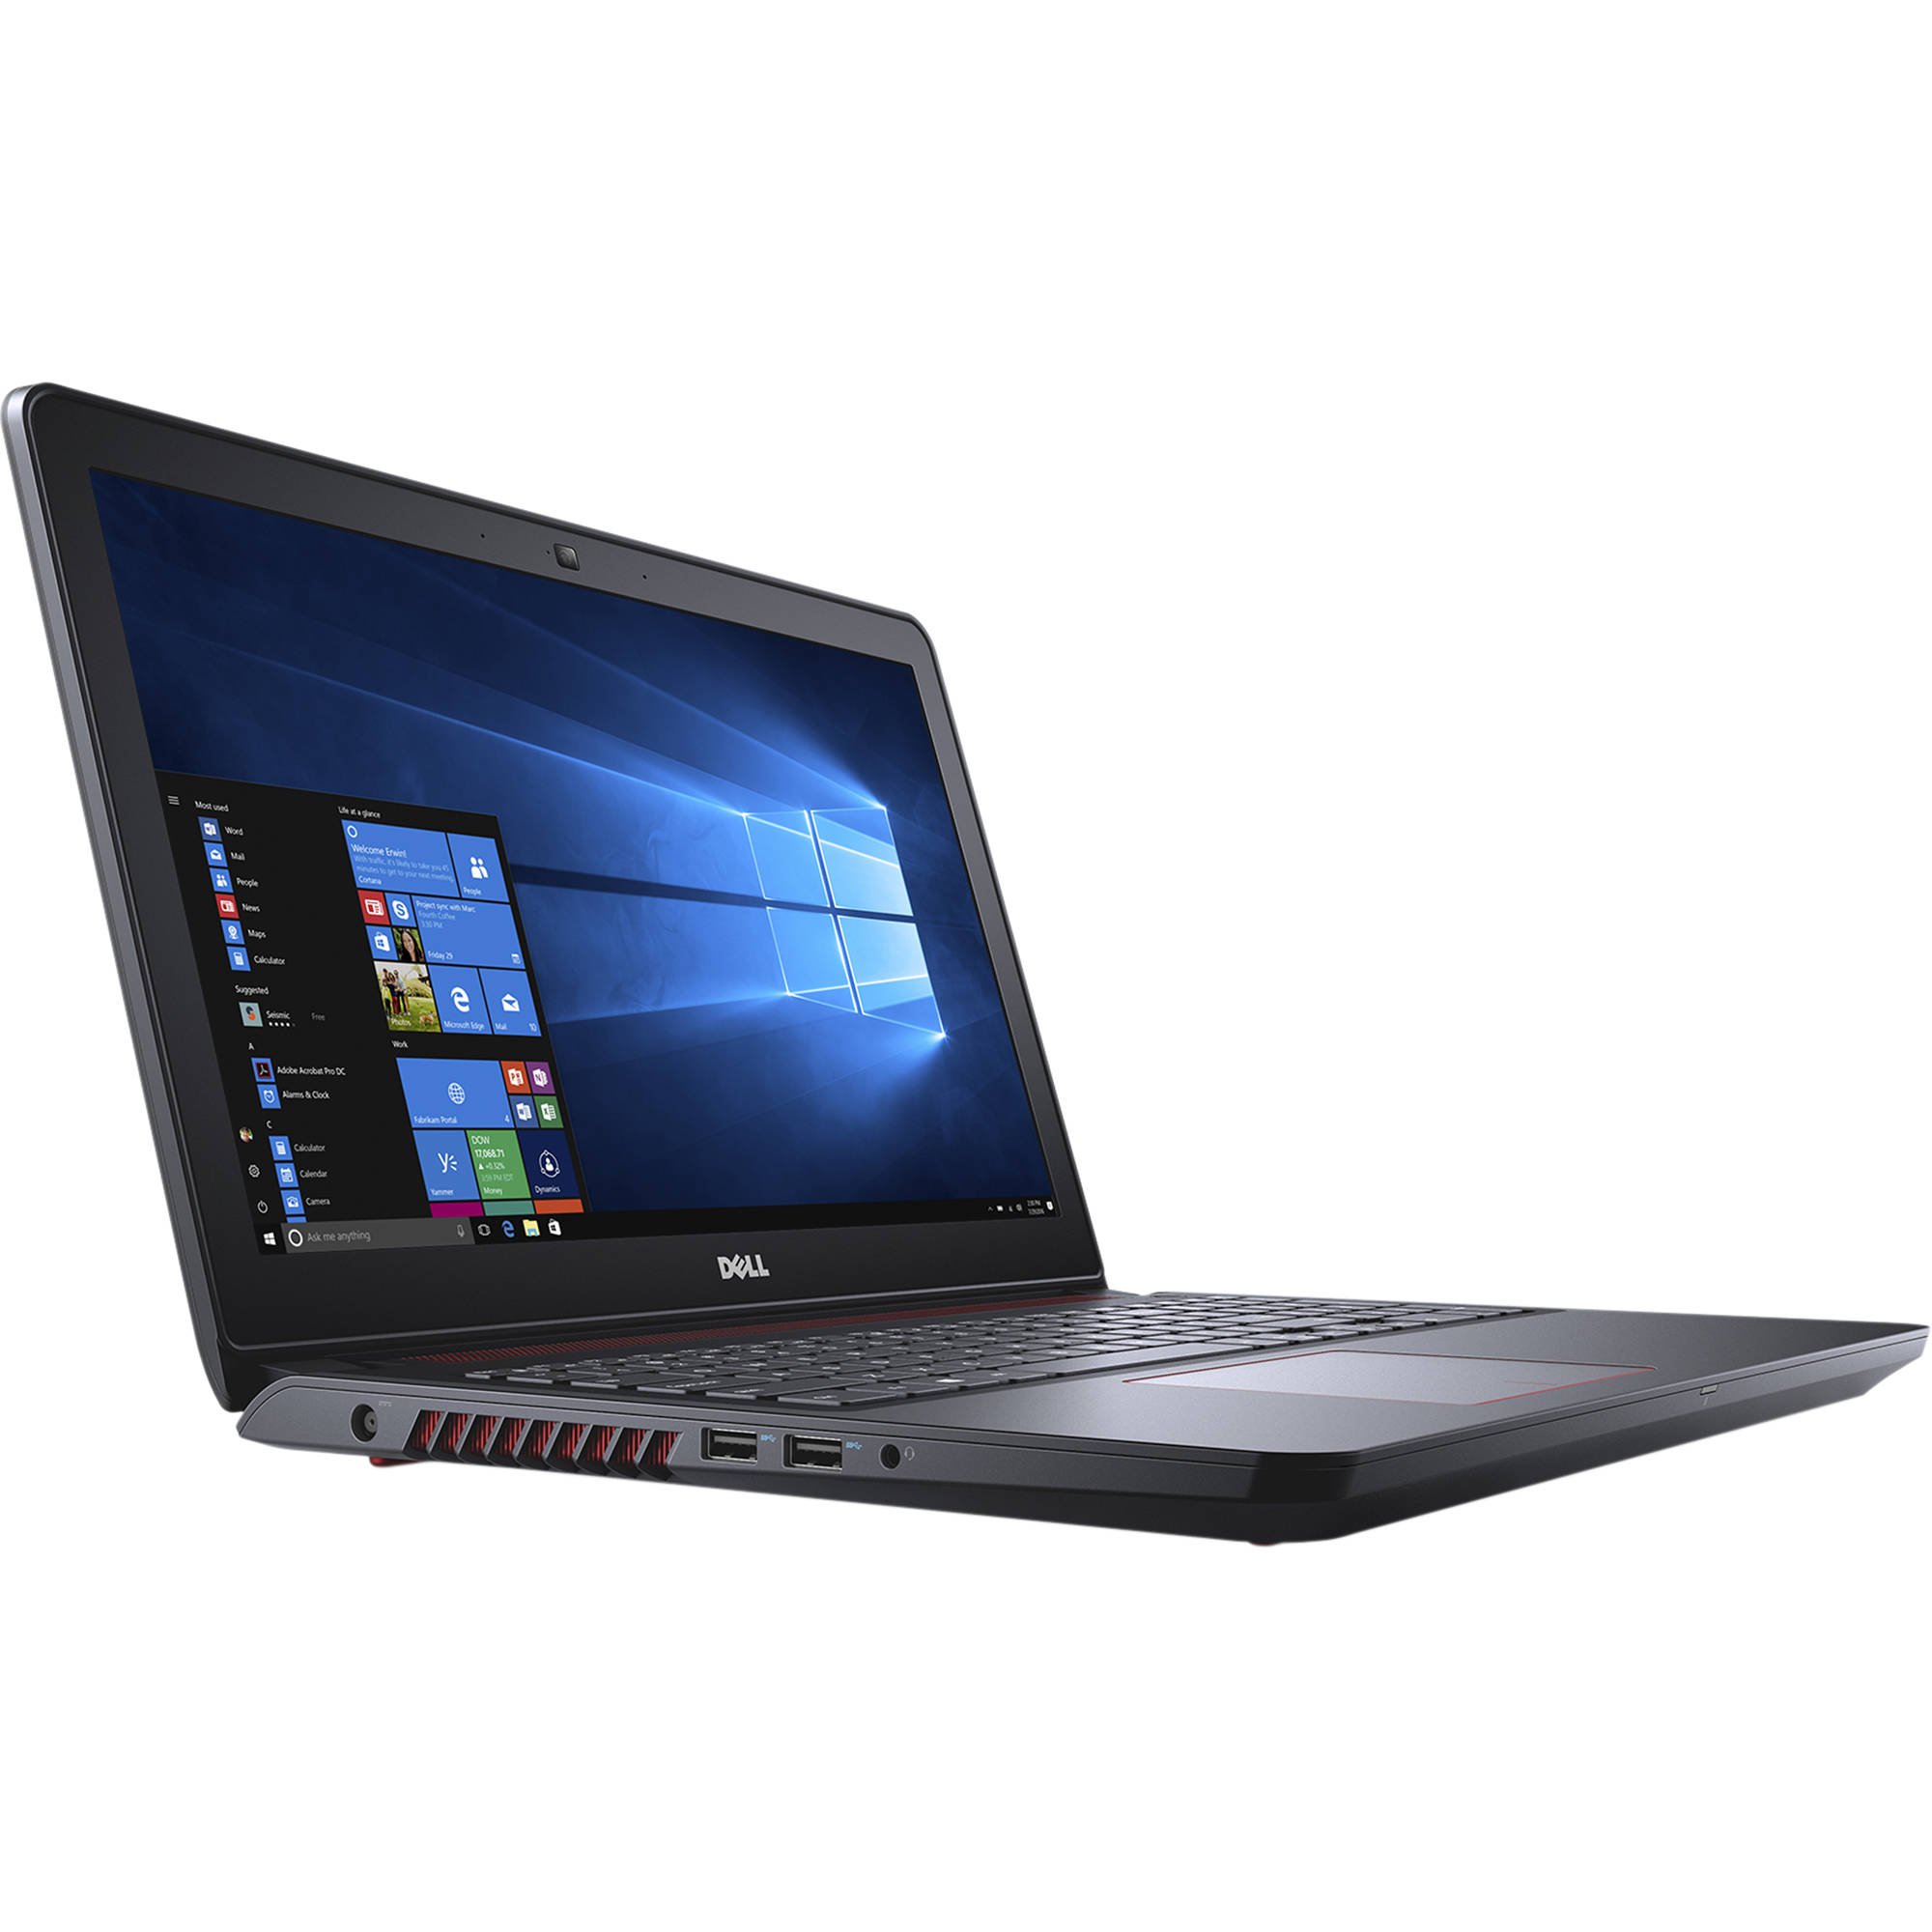 Dell Inspiron 15 5000 i7 Gaming Laptop